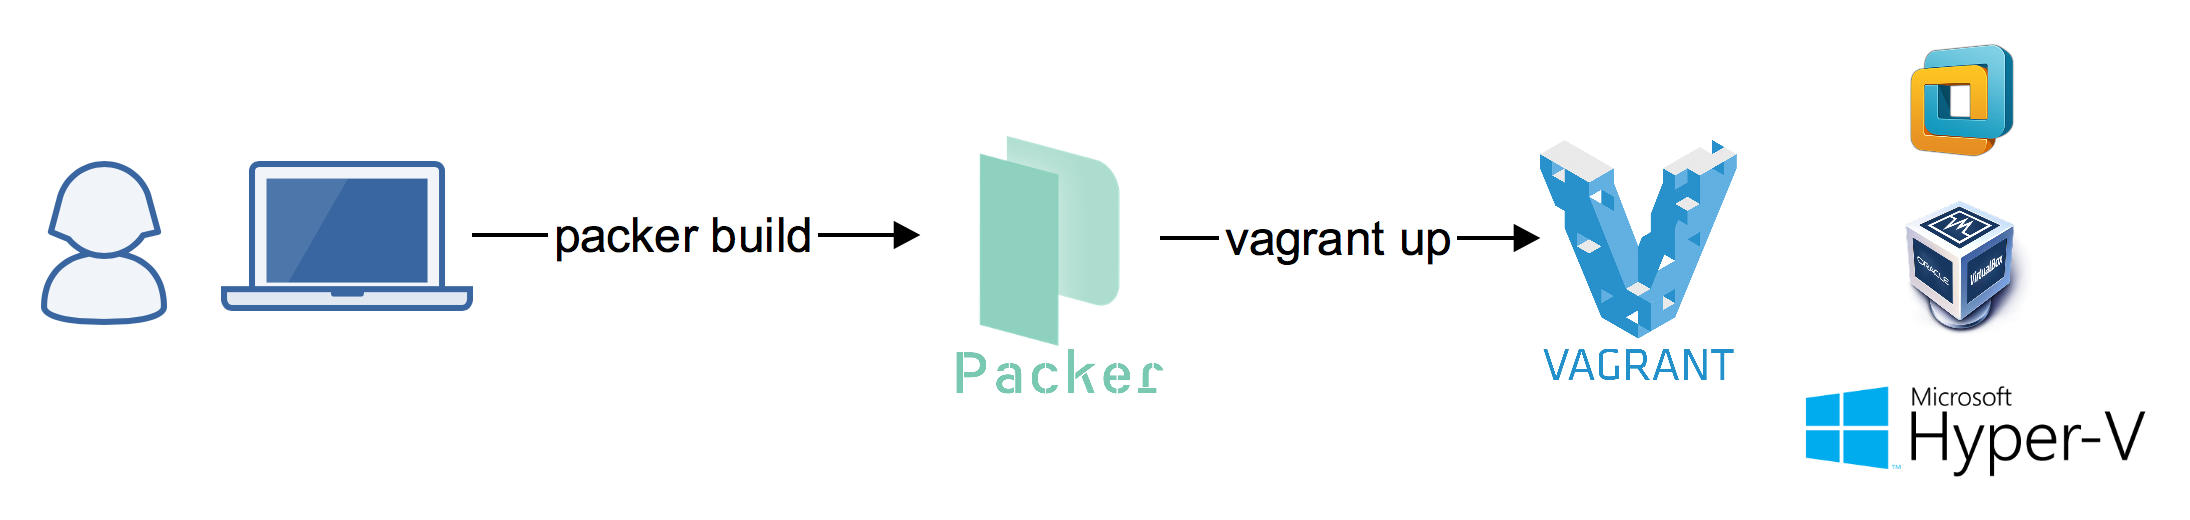 packer build, vagrant up